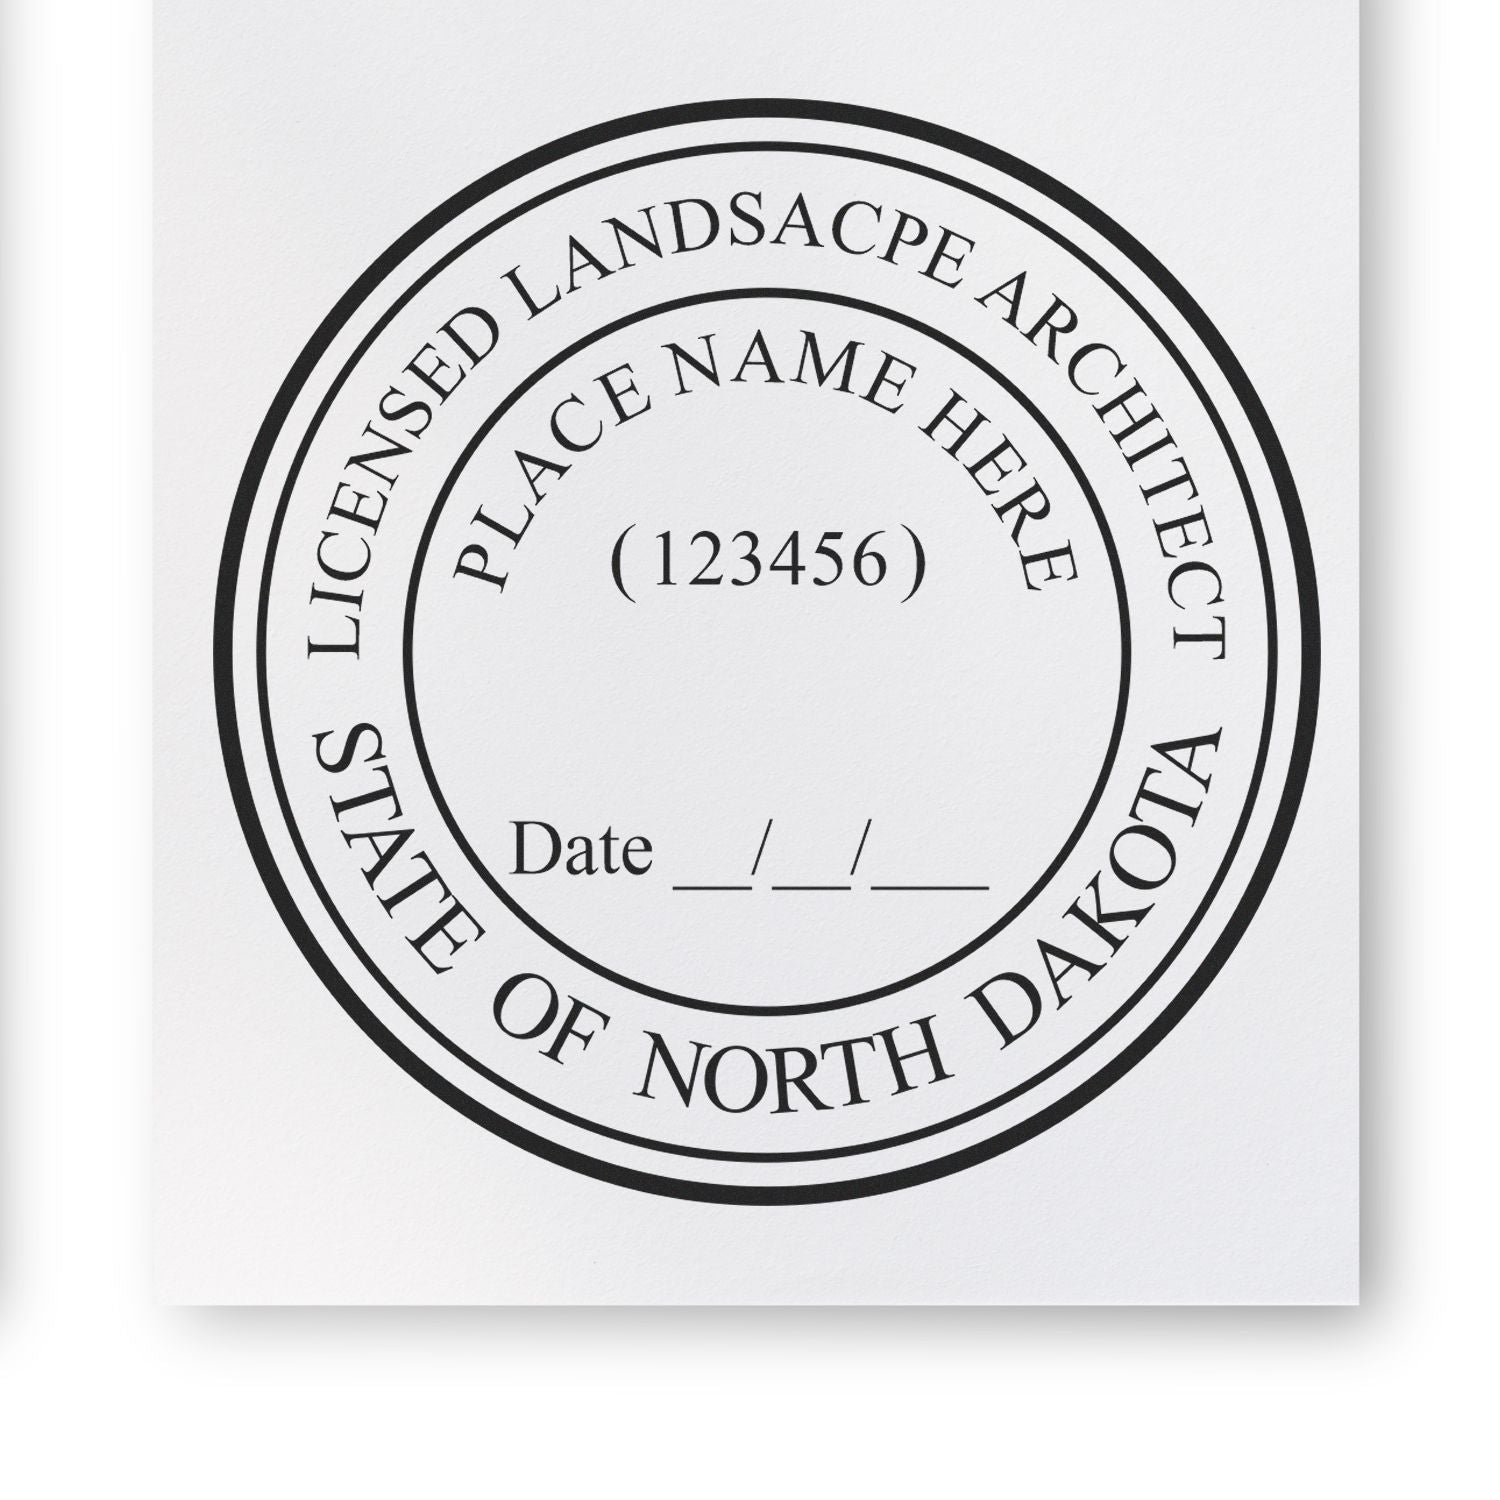 The main image for the Digital North Dakota Landscape Architect Stamp depicting a sample of the imprint and electronic files